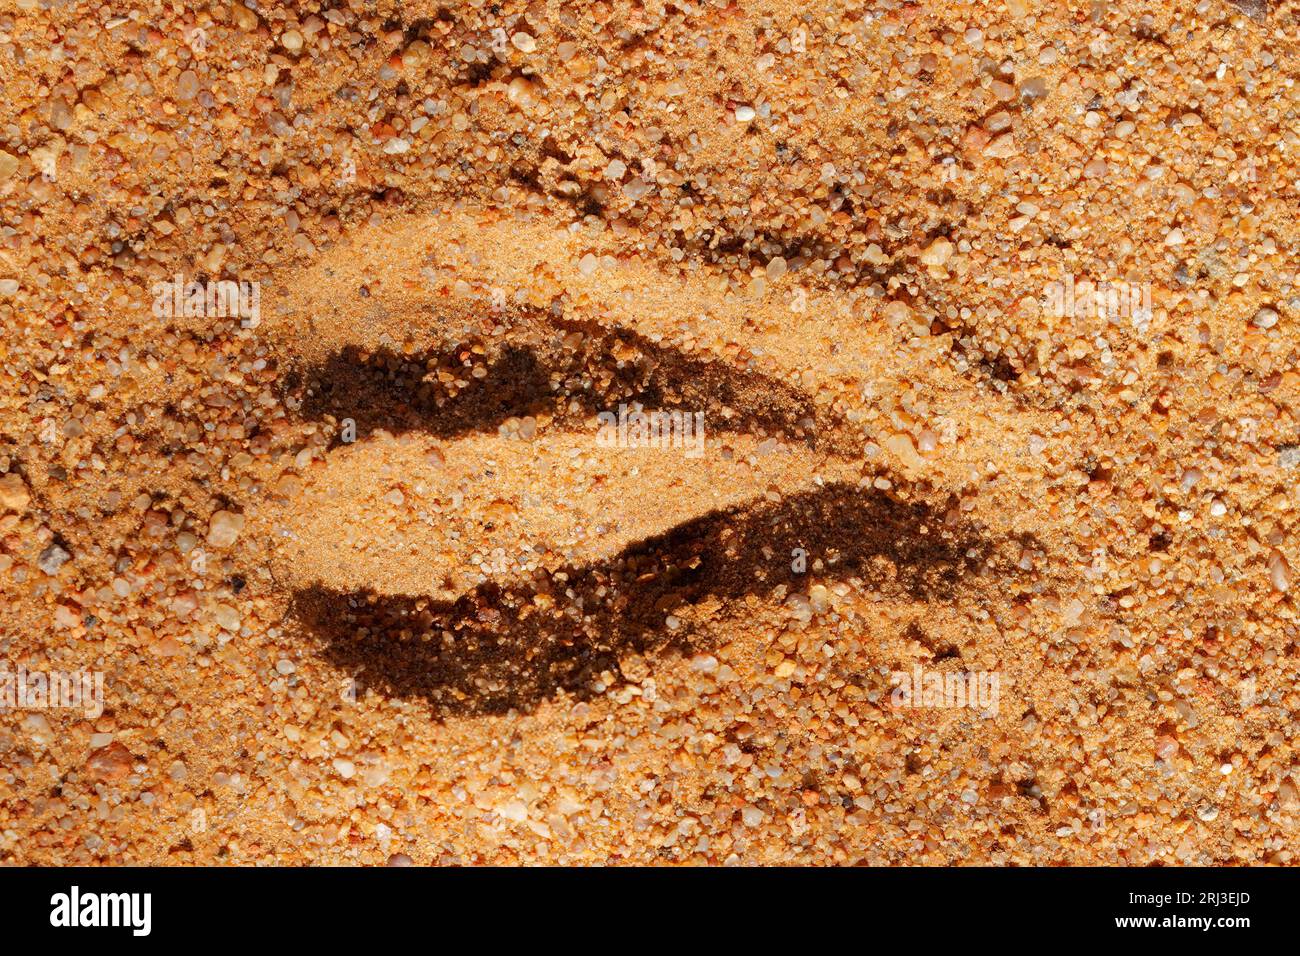 Hoof imprint of an African antelope in soft sand Stock Photo